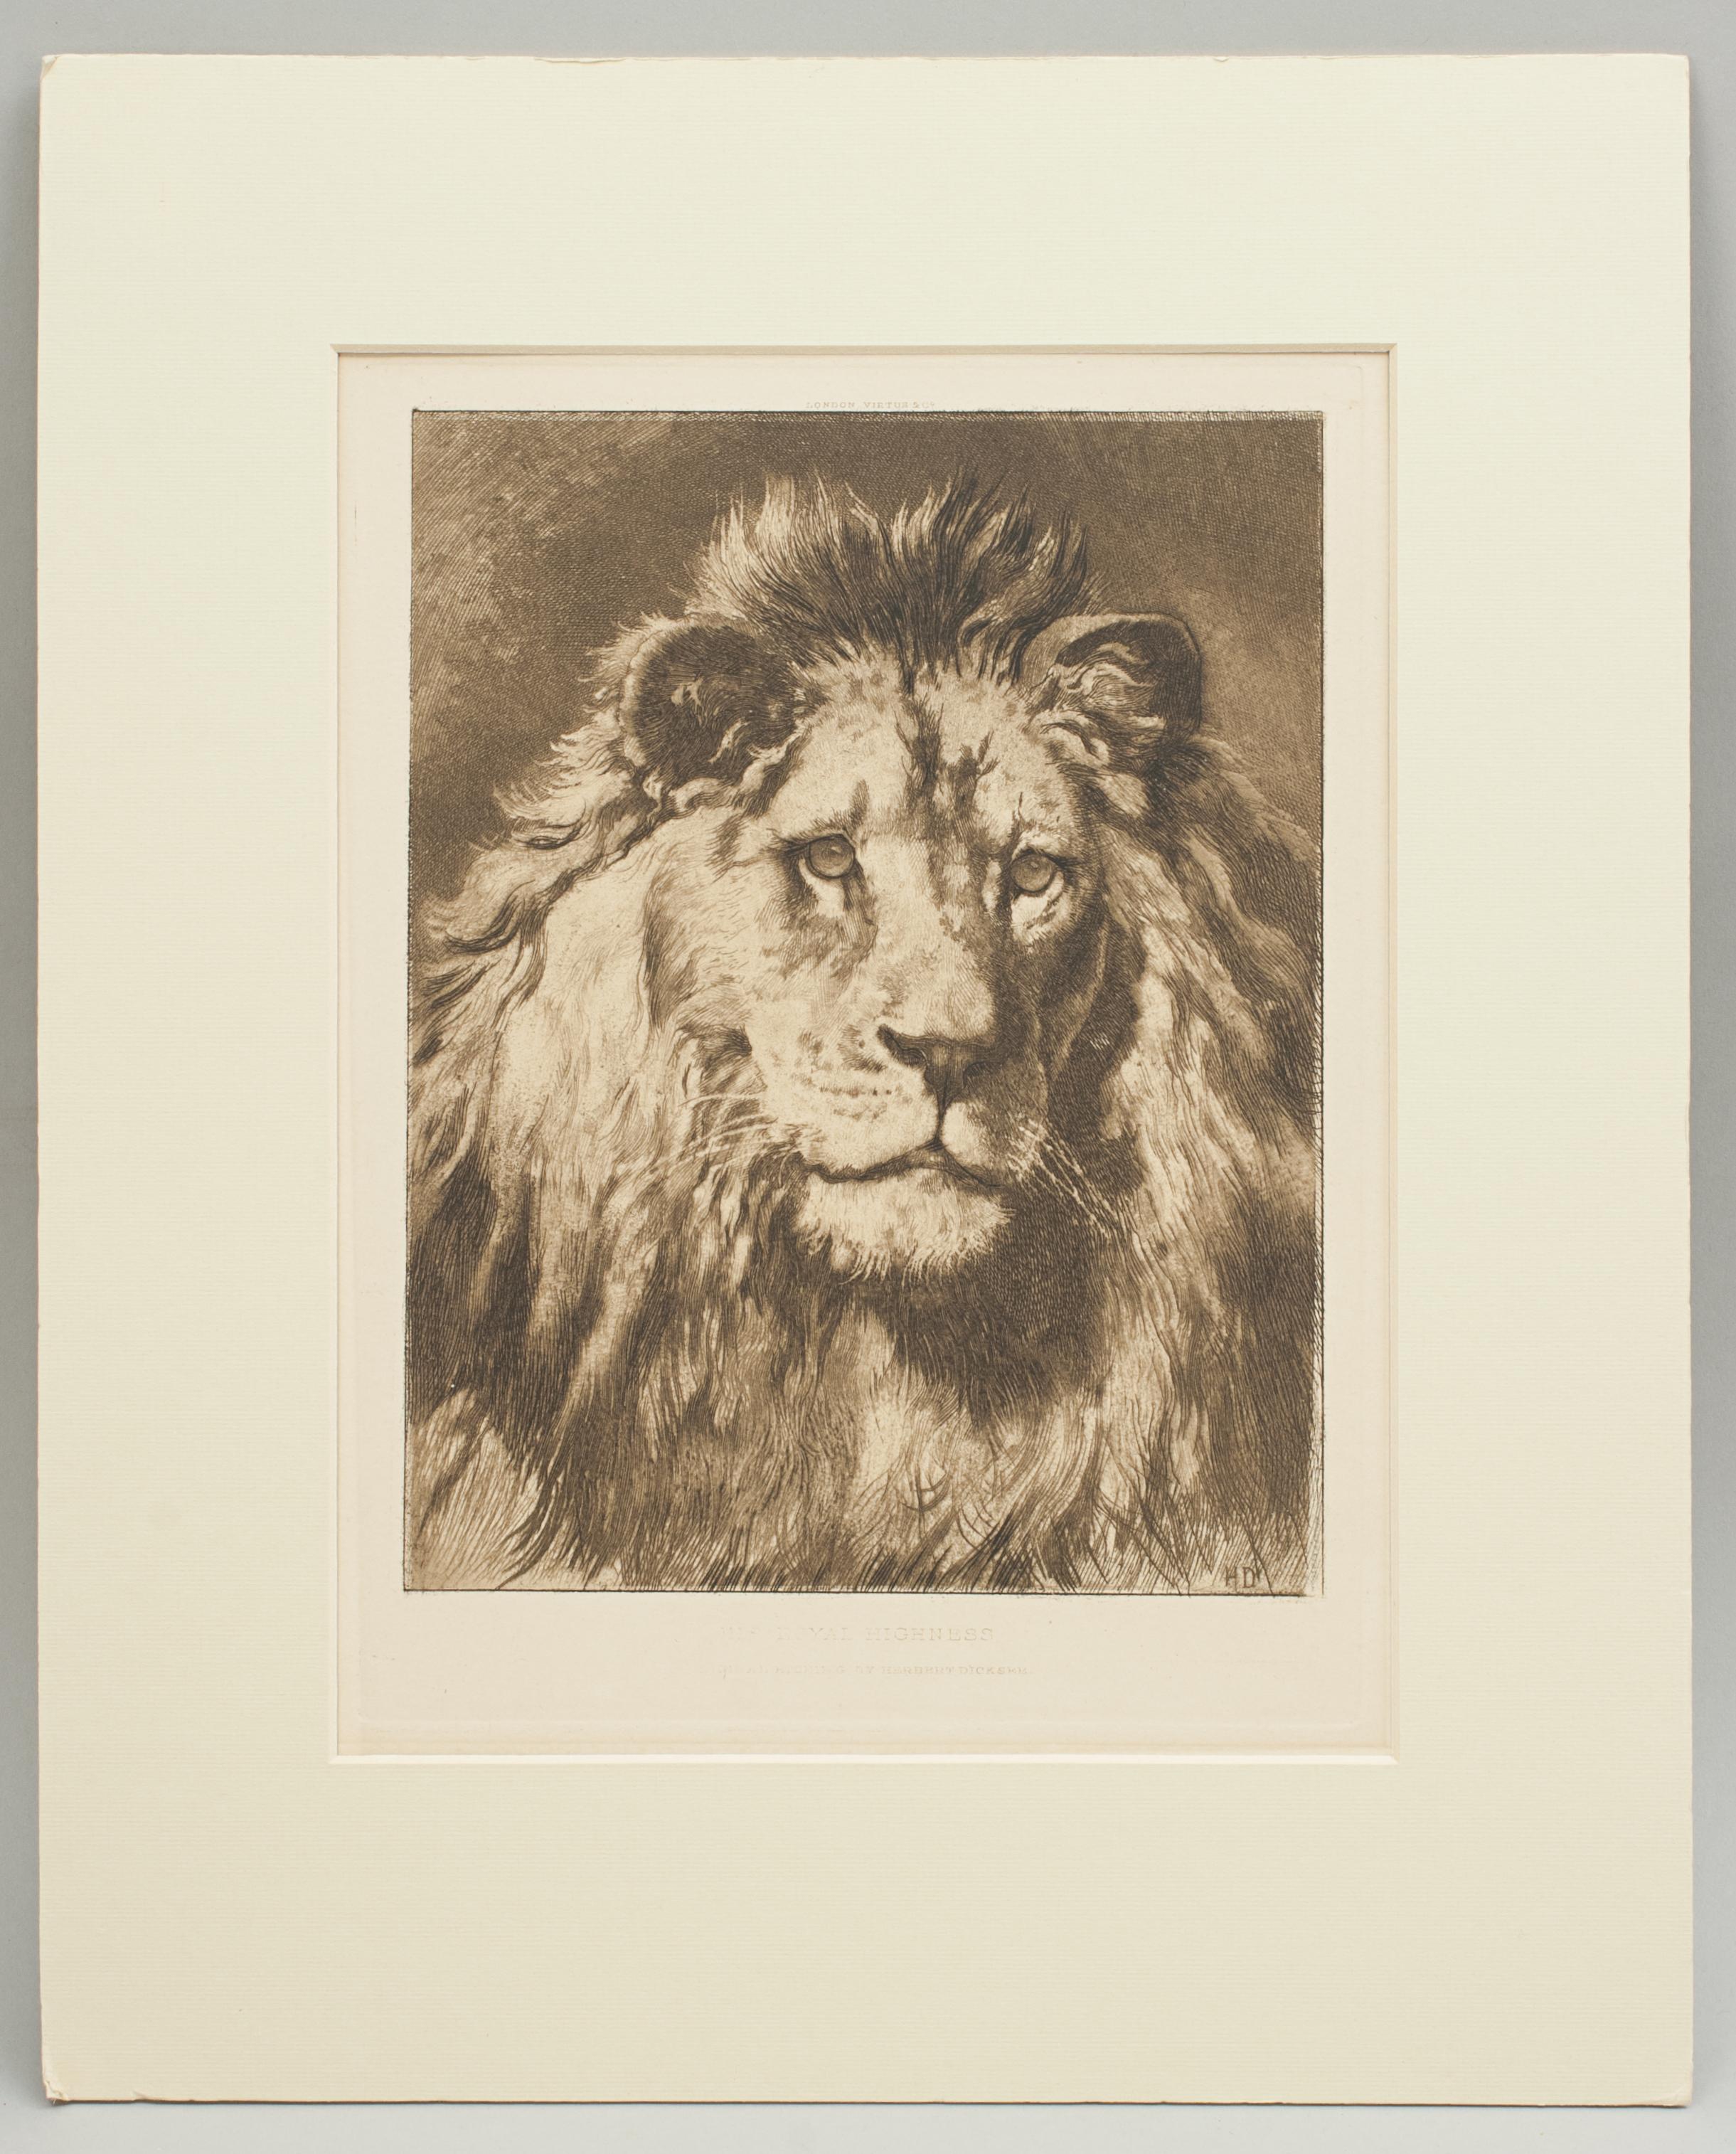 Paper Lion Print by Herbert Dicksee, His Royal Highness